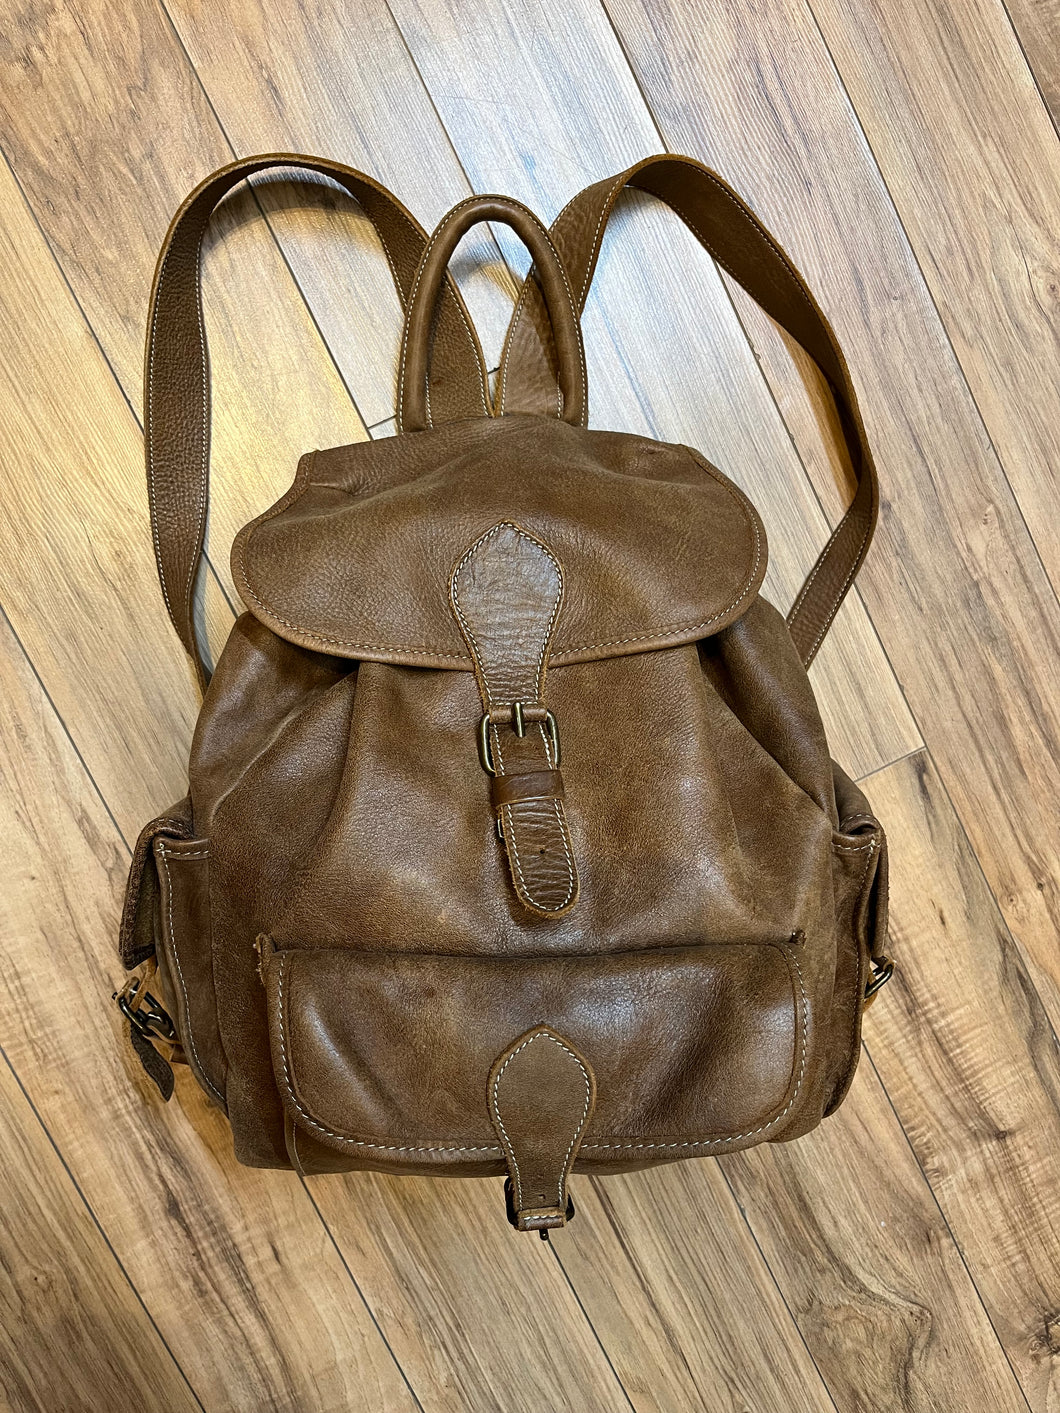 Vintage Roots Tribal Leather brown knapsack with adjustable shoulder straps, drawstring and buckle closures, one large main compartment and three small outer pockets.

Made in Canada